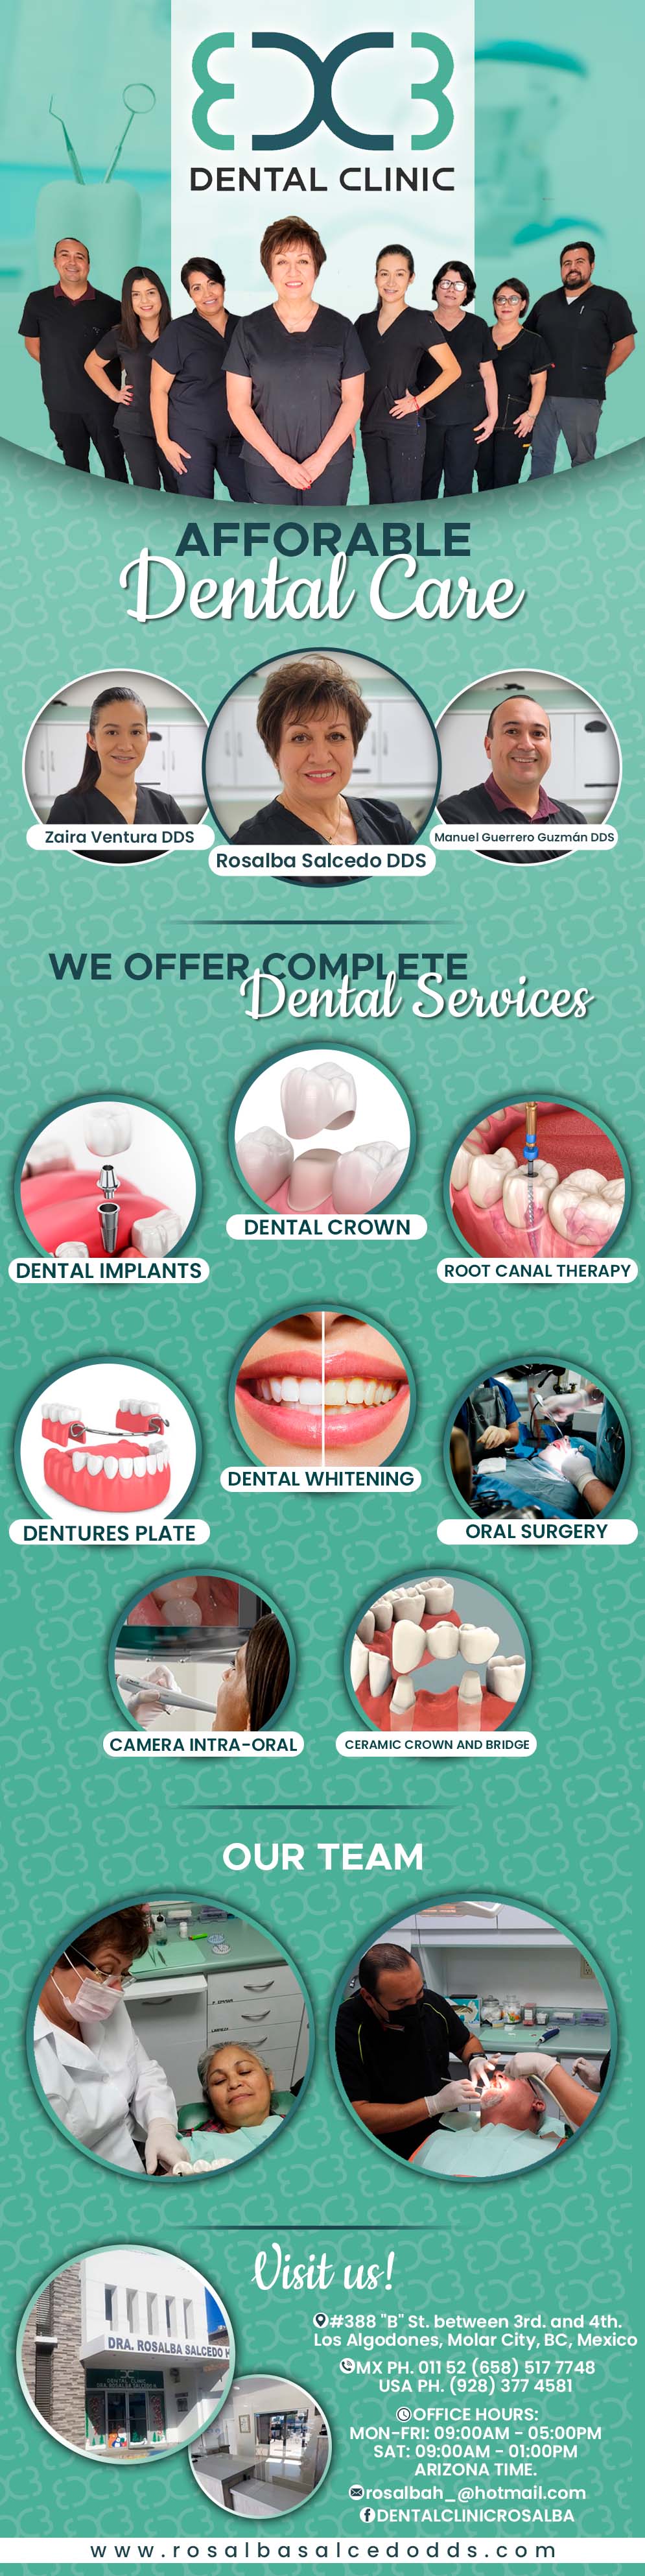 Dental Clinic Dra. Rosalba Salcedo H.  in Algodones  in Algodones  Implants  ~ Cosmetic Dentistry
General Dentistry  Surgery  X-Rays
Over 20 years Experience
Excellent Patient Referrals
Welcome to Our New Office
Consultation With or Referral to Specialists When Required
Your Dental Care Is In Good Hands
“New” Flexible Valplast Partials ~ Gold Crowns
Porcelain Crowns ~  Root Canals ~ Fiber Posts ~ Inlays Porcelain Bridges ~ Porcelain Bridges with Gold ~ Metal Bridges Traditional Acrylic Dentures ~ Molloplast (Soft Material) Dentures General Oral Surgery ~ Onlays ~ Jackets ~ Traditional Partials  Sedation Proflex (Flexible) Dentures ~ Prescriptions 
~ Relines (Hard / Soft)
  Fluoride Treatments ~ Deep Cleaning  ~ Repair to Dentures Traditional Cleaning ~ Wisdom Teeth Extraction ~ Porcelain Fillings Immediate Upper and Lower Dentures (Alveoplasty) 
~ Laser Teeth Whitening
On Site Dental Lab ~ Autoclave Sterilization ~ Digital X-Rays
         mplants  ~ Cosmetic Dentistry
General Dentistry  Surgery  X-Rays
Over 20 years Experience
Excellent Patient Referrals
Welcome to Our New Office
Consultation With or Referral to Specialists When Required
Your Dental Care Is In Good Hands
“New” Flexible Valplast Partials ~ Gold Crowns
Porcelain Crowns ~  Root Canals ~ Fiber Posts ~ Inlays Porcelain Bridges ~ Porcelain Bridges with Gold ~ Metal Bridges Traditional Acrylic Dentures ~ Molloplast (Soft Material) Dentures General Oral Surgery ~ Onlays ~ Jackets ~ Traditional Partials  Sedation Proflex (Flexible) Dentures ~ Prescriptions 
~ Relines (Hard / Soft)
  Fluoride Treatments ~ Deep Cleaning  ~ Repair to Dentures Traditional Cleaning ~ Wisdom Teeth Extraction ~ Porcelain Fillings Immediate Upper and Lower Dentures (Alveoplasty) 
~ Laser Teeth Whitening
On Site Dental Lab ~ Autoclave Sterilization ~ Digital X-Rays
        